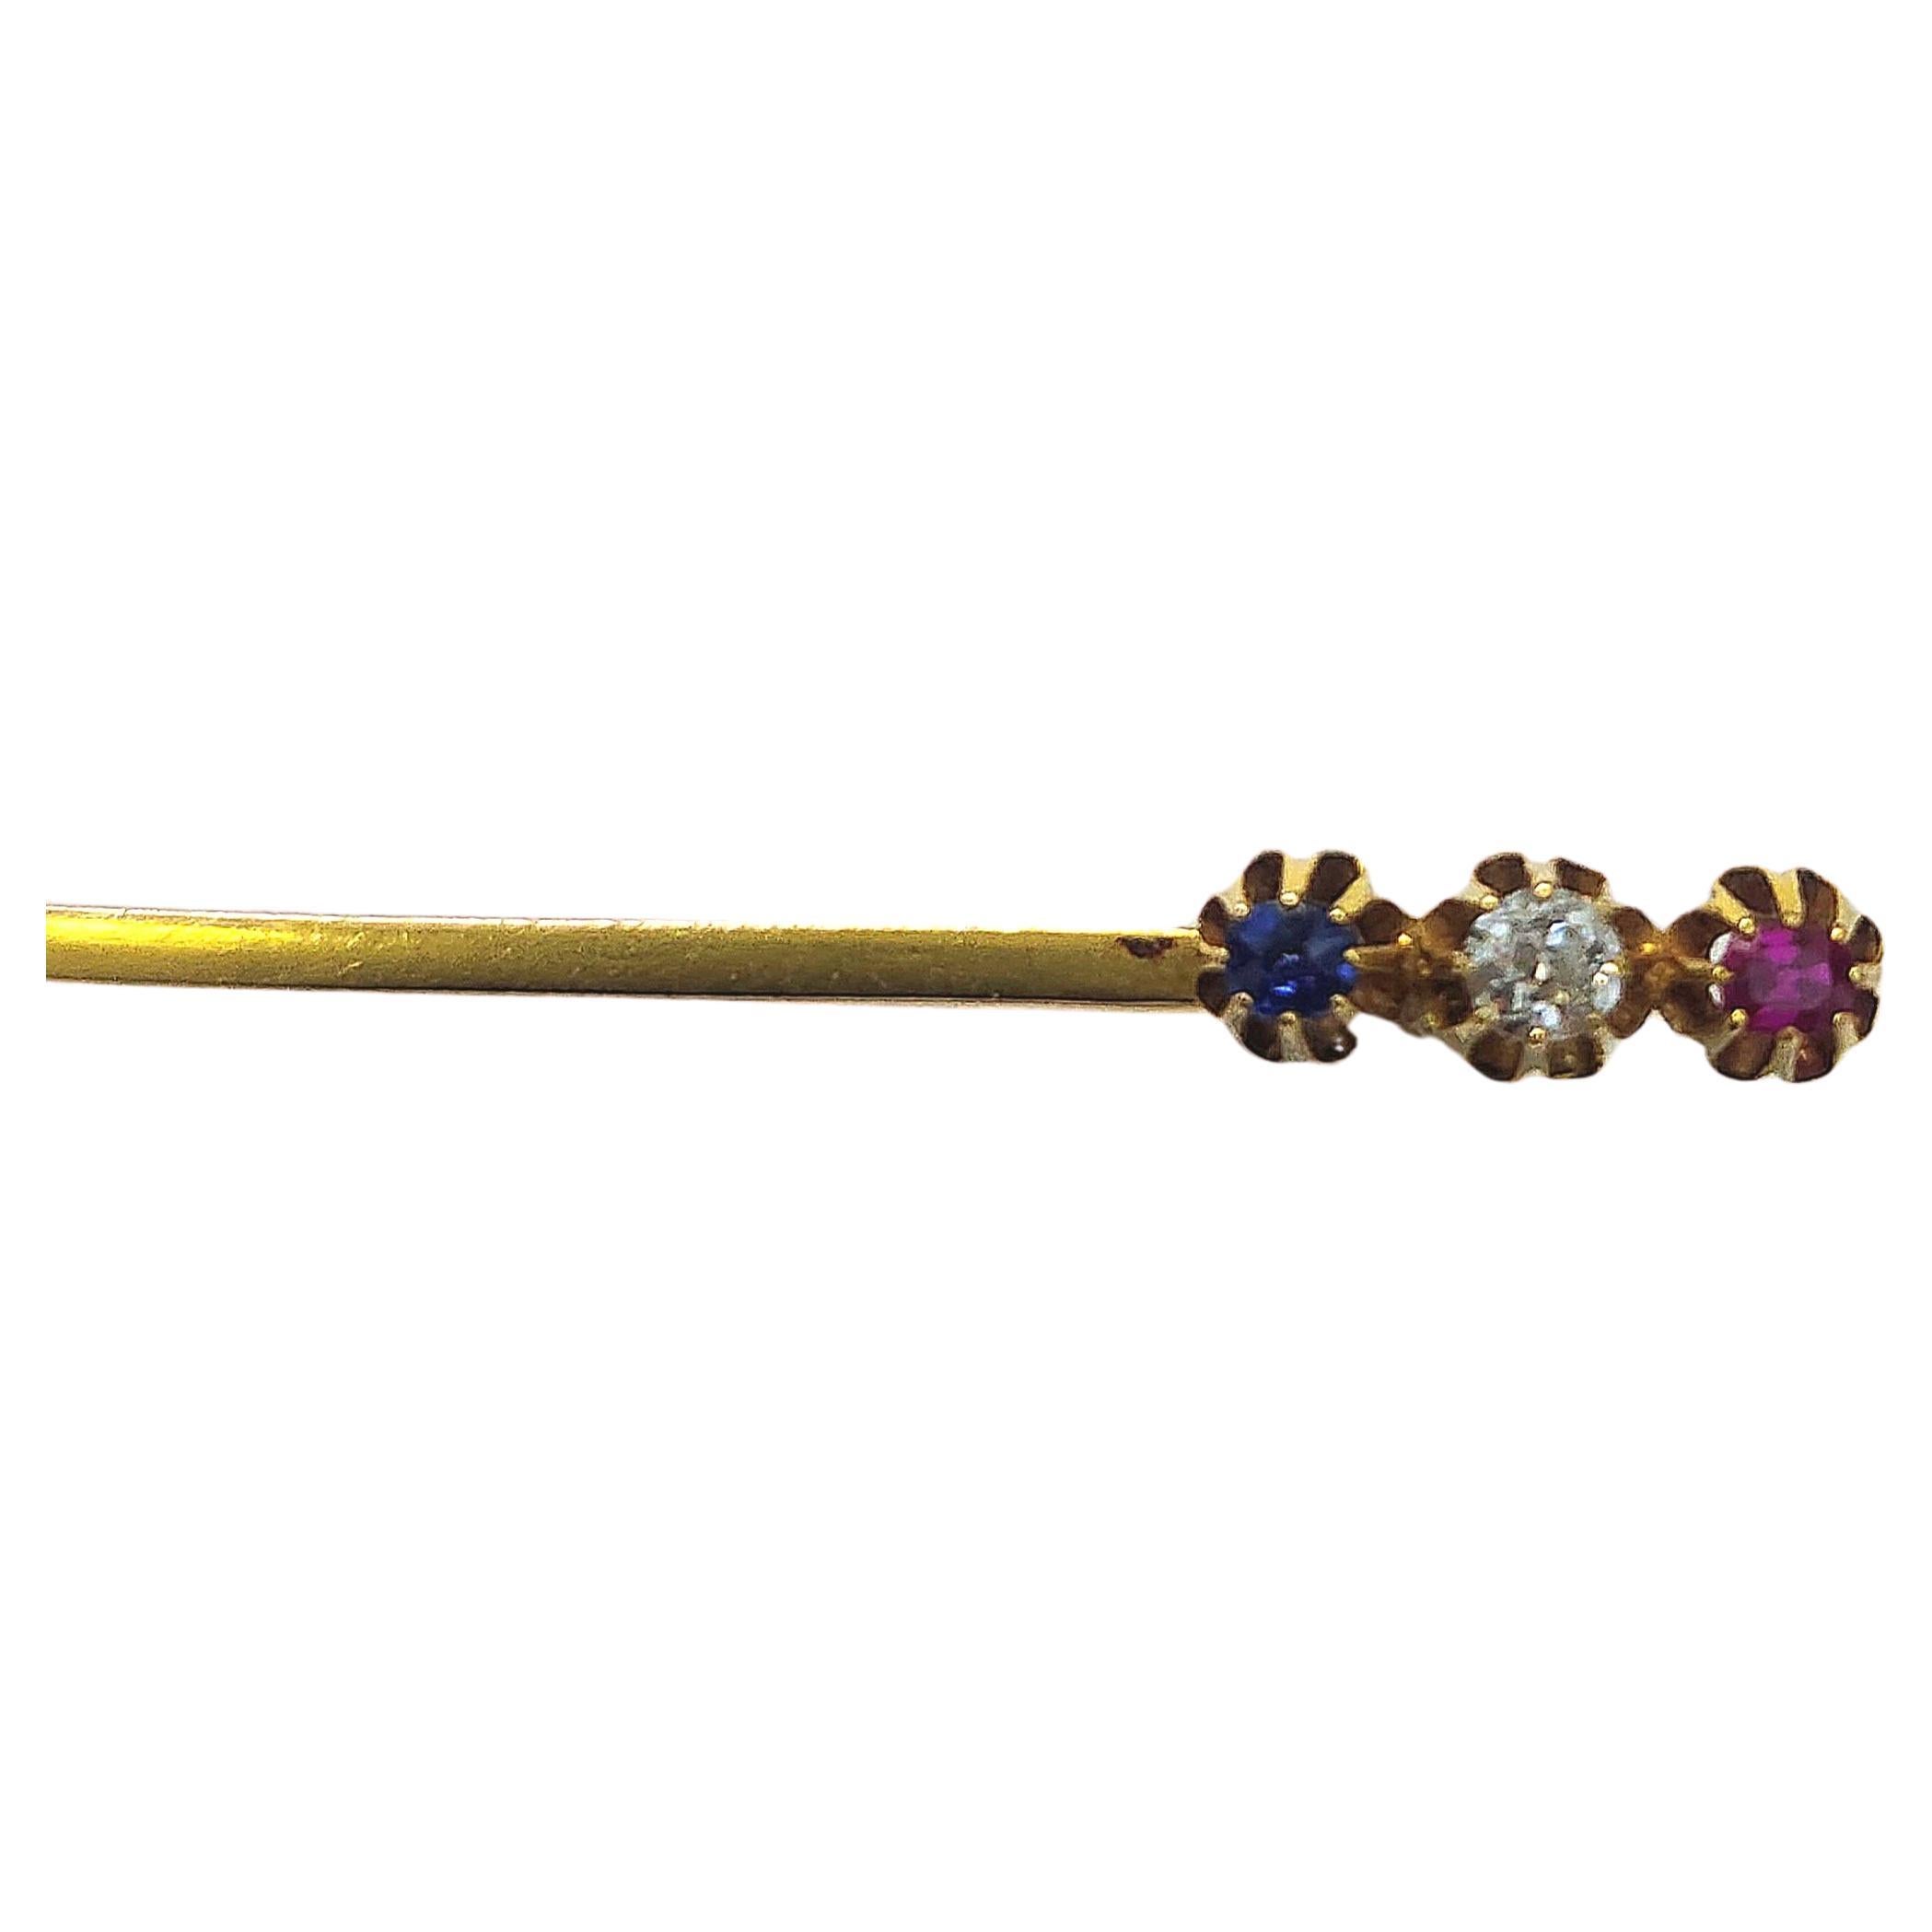 Antique pin with 3 natural gem stones ruby sapphire and old mine cut diamond pin was made during the late imperial russian era 1917/1920s in 14k gold hall marked 583 gold standard and assay mark 